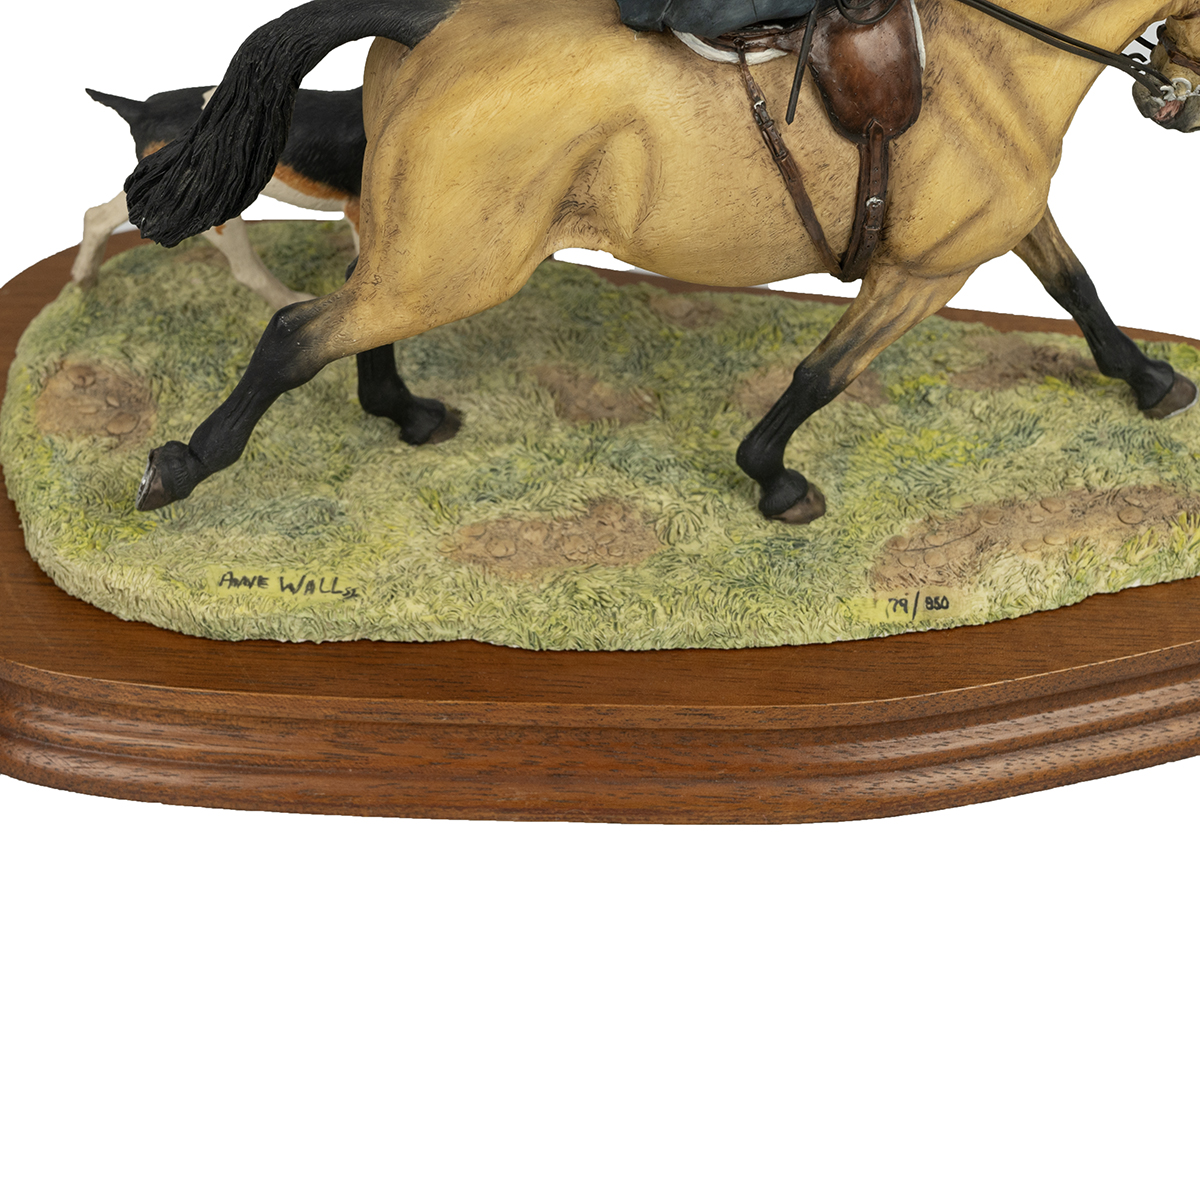 Border Fine Arts "Elegance in the Field" limited edition (79/850) figurine on removable wooden ba... - Image 3 of 3